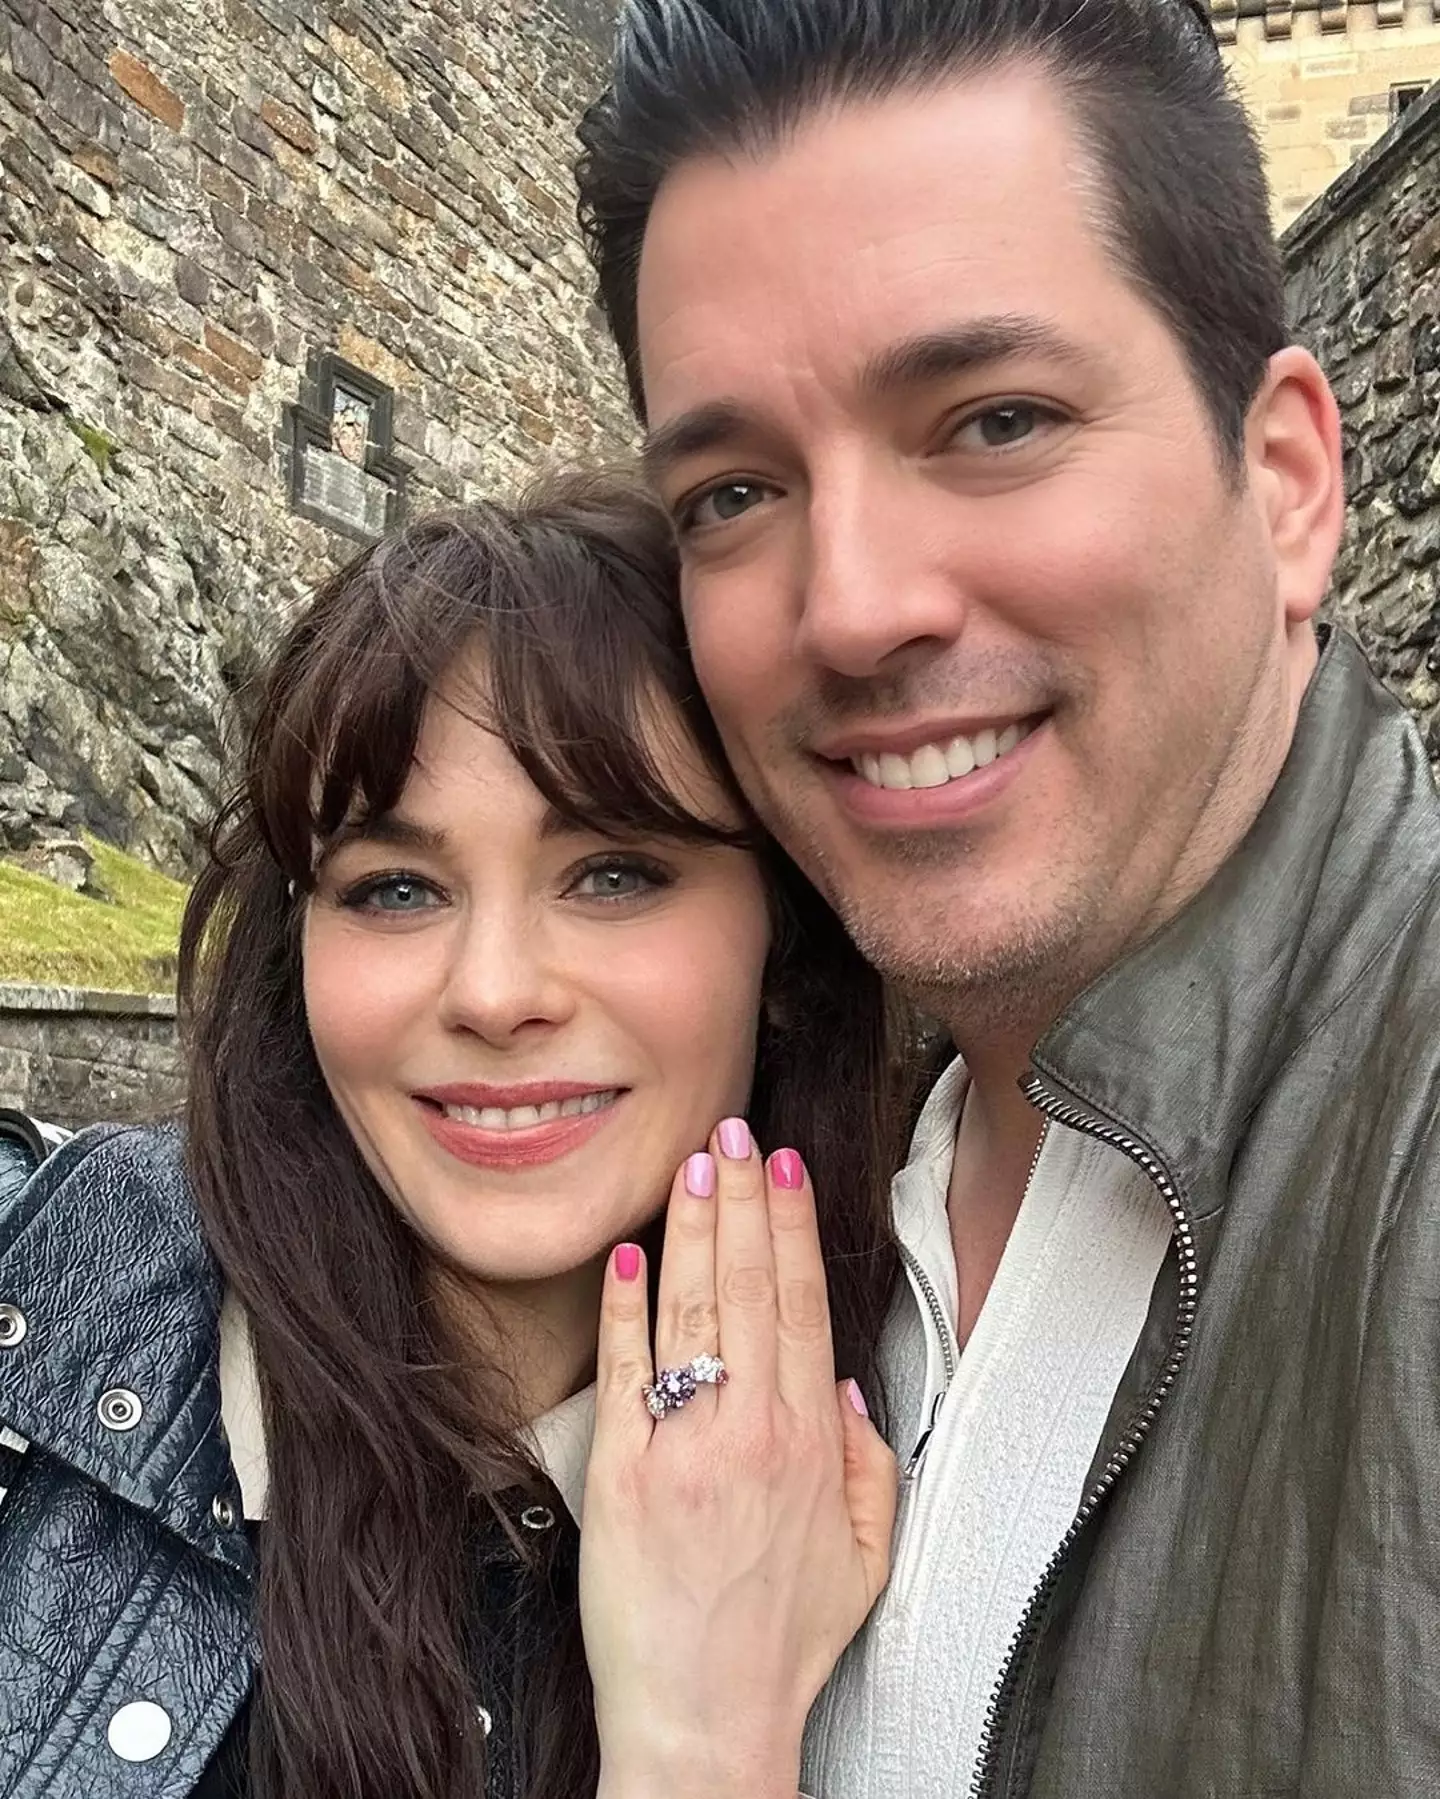 Zooey Deschanel and Jonathan Scott are engaged.